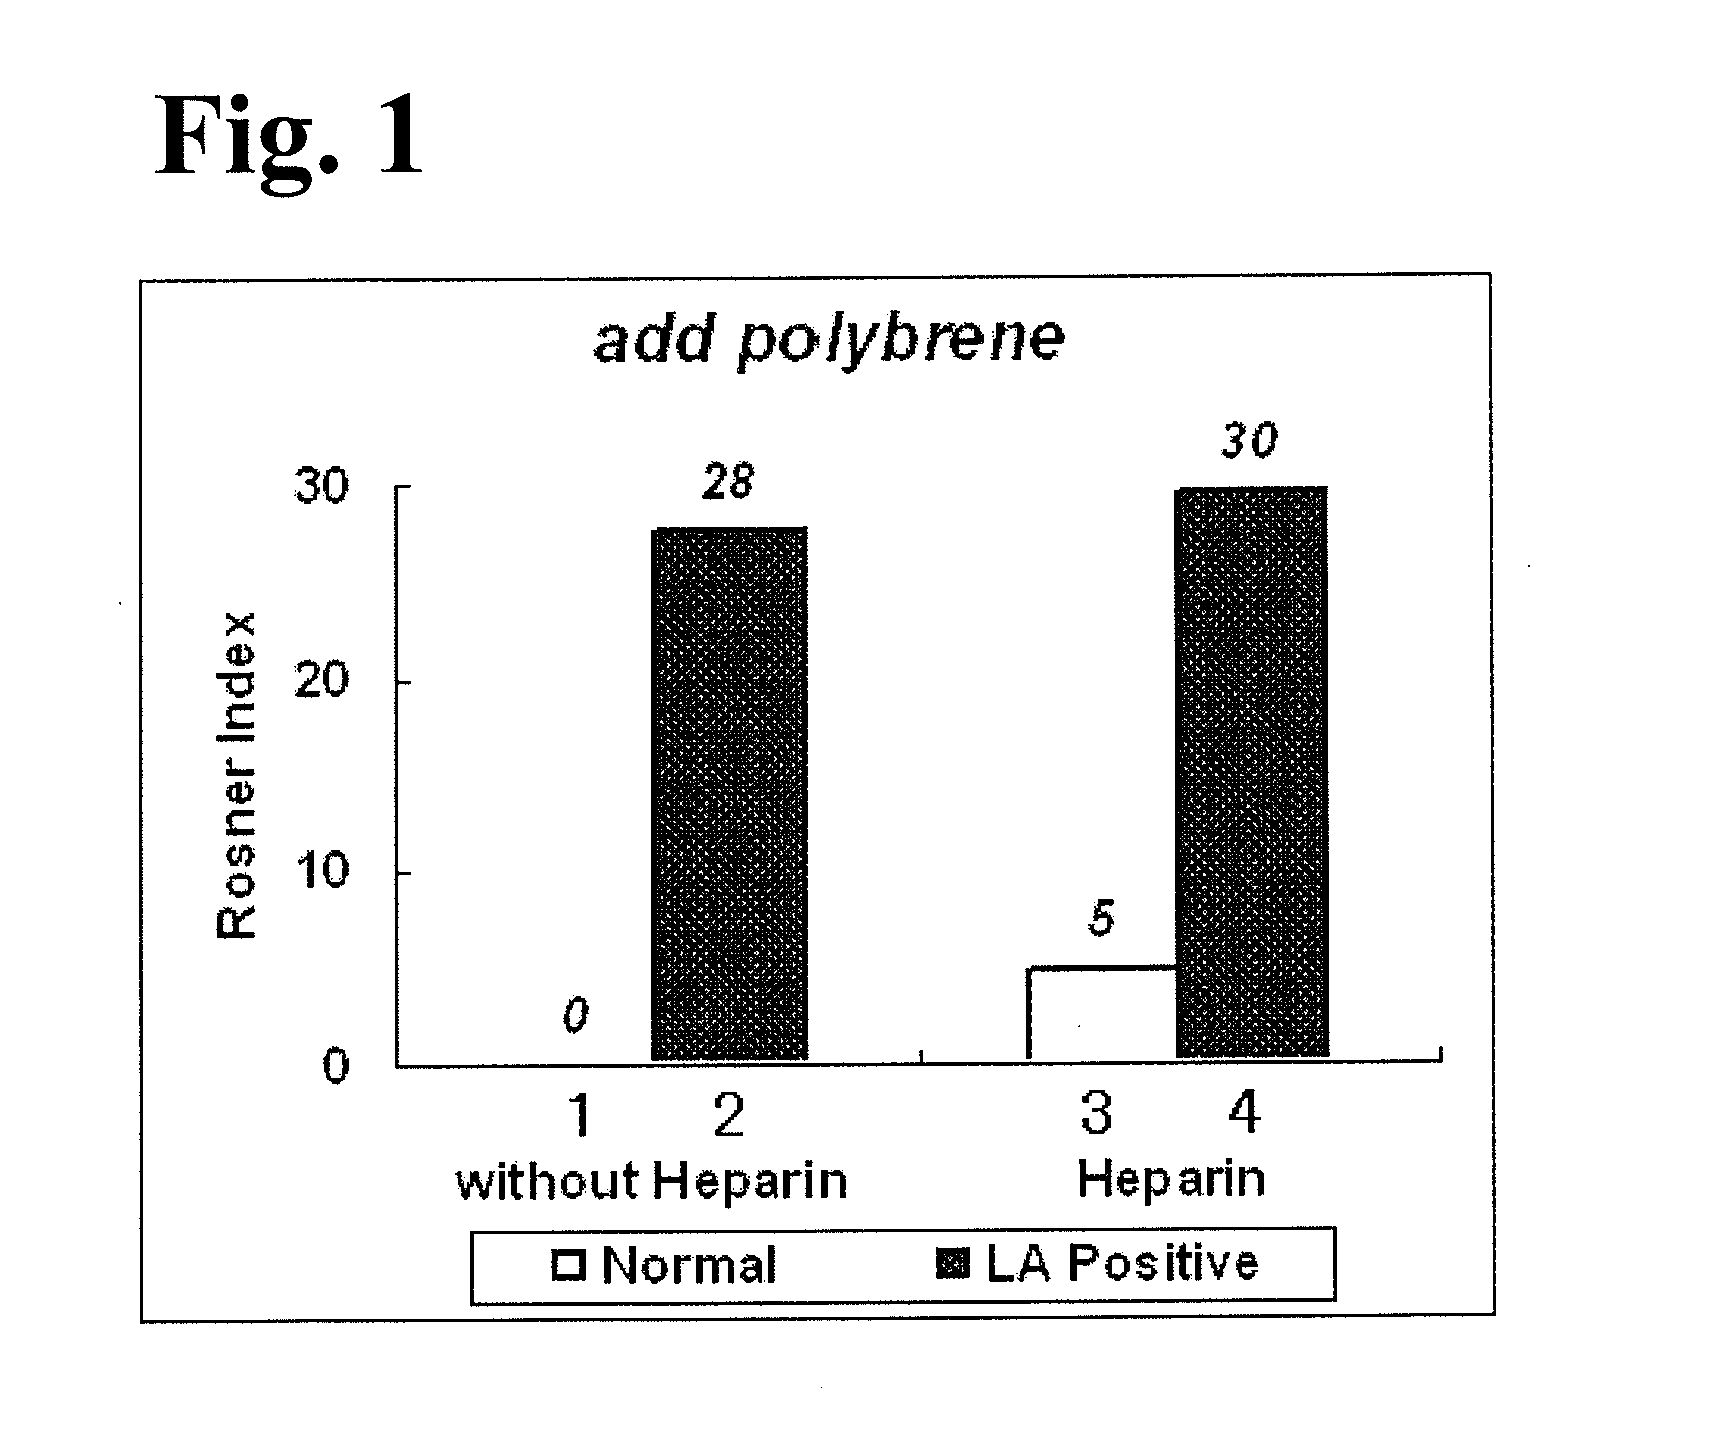 Activated partial thromboplastin time measuring reagent, activated partial thromboplastin time measuring method, and determination method for determining presence or absence of blood coagulation inhibitor